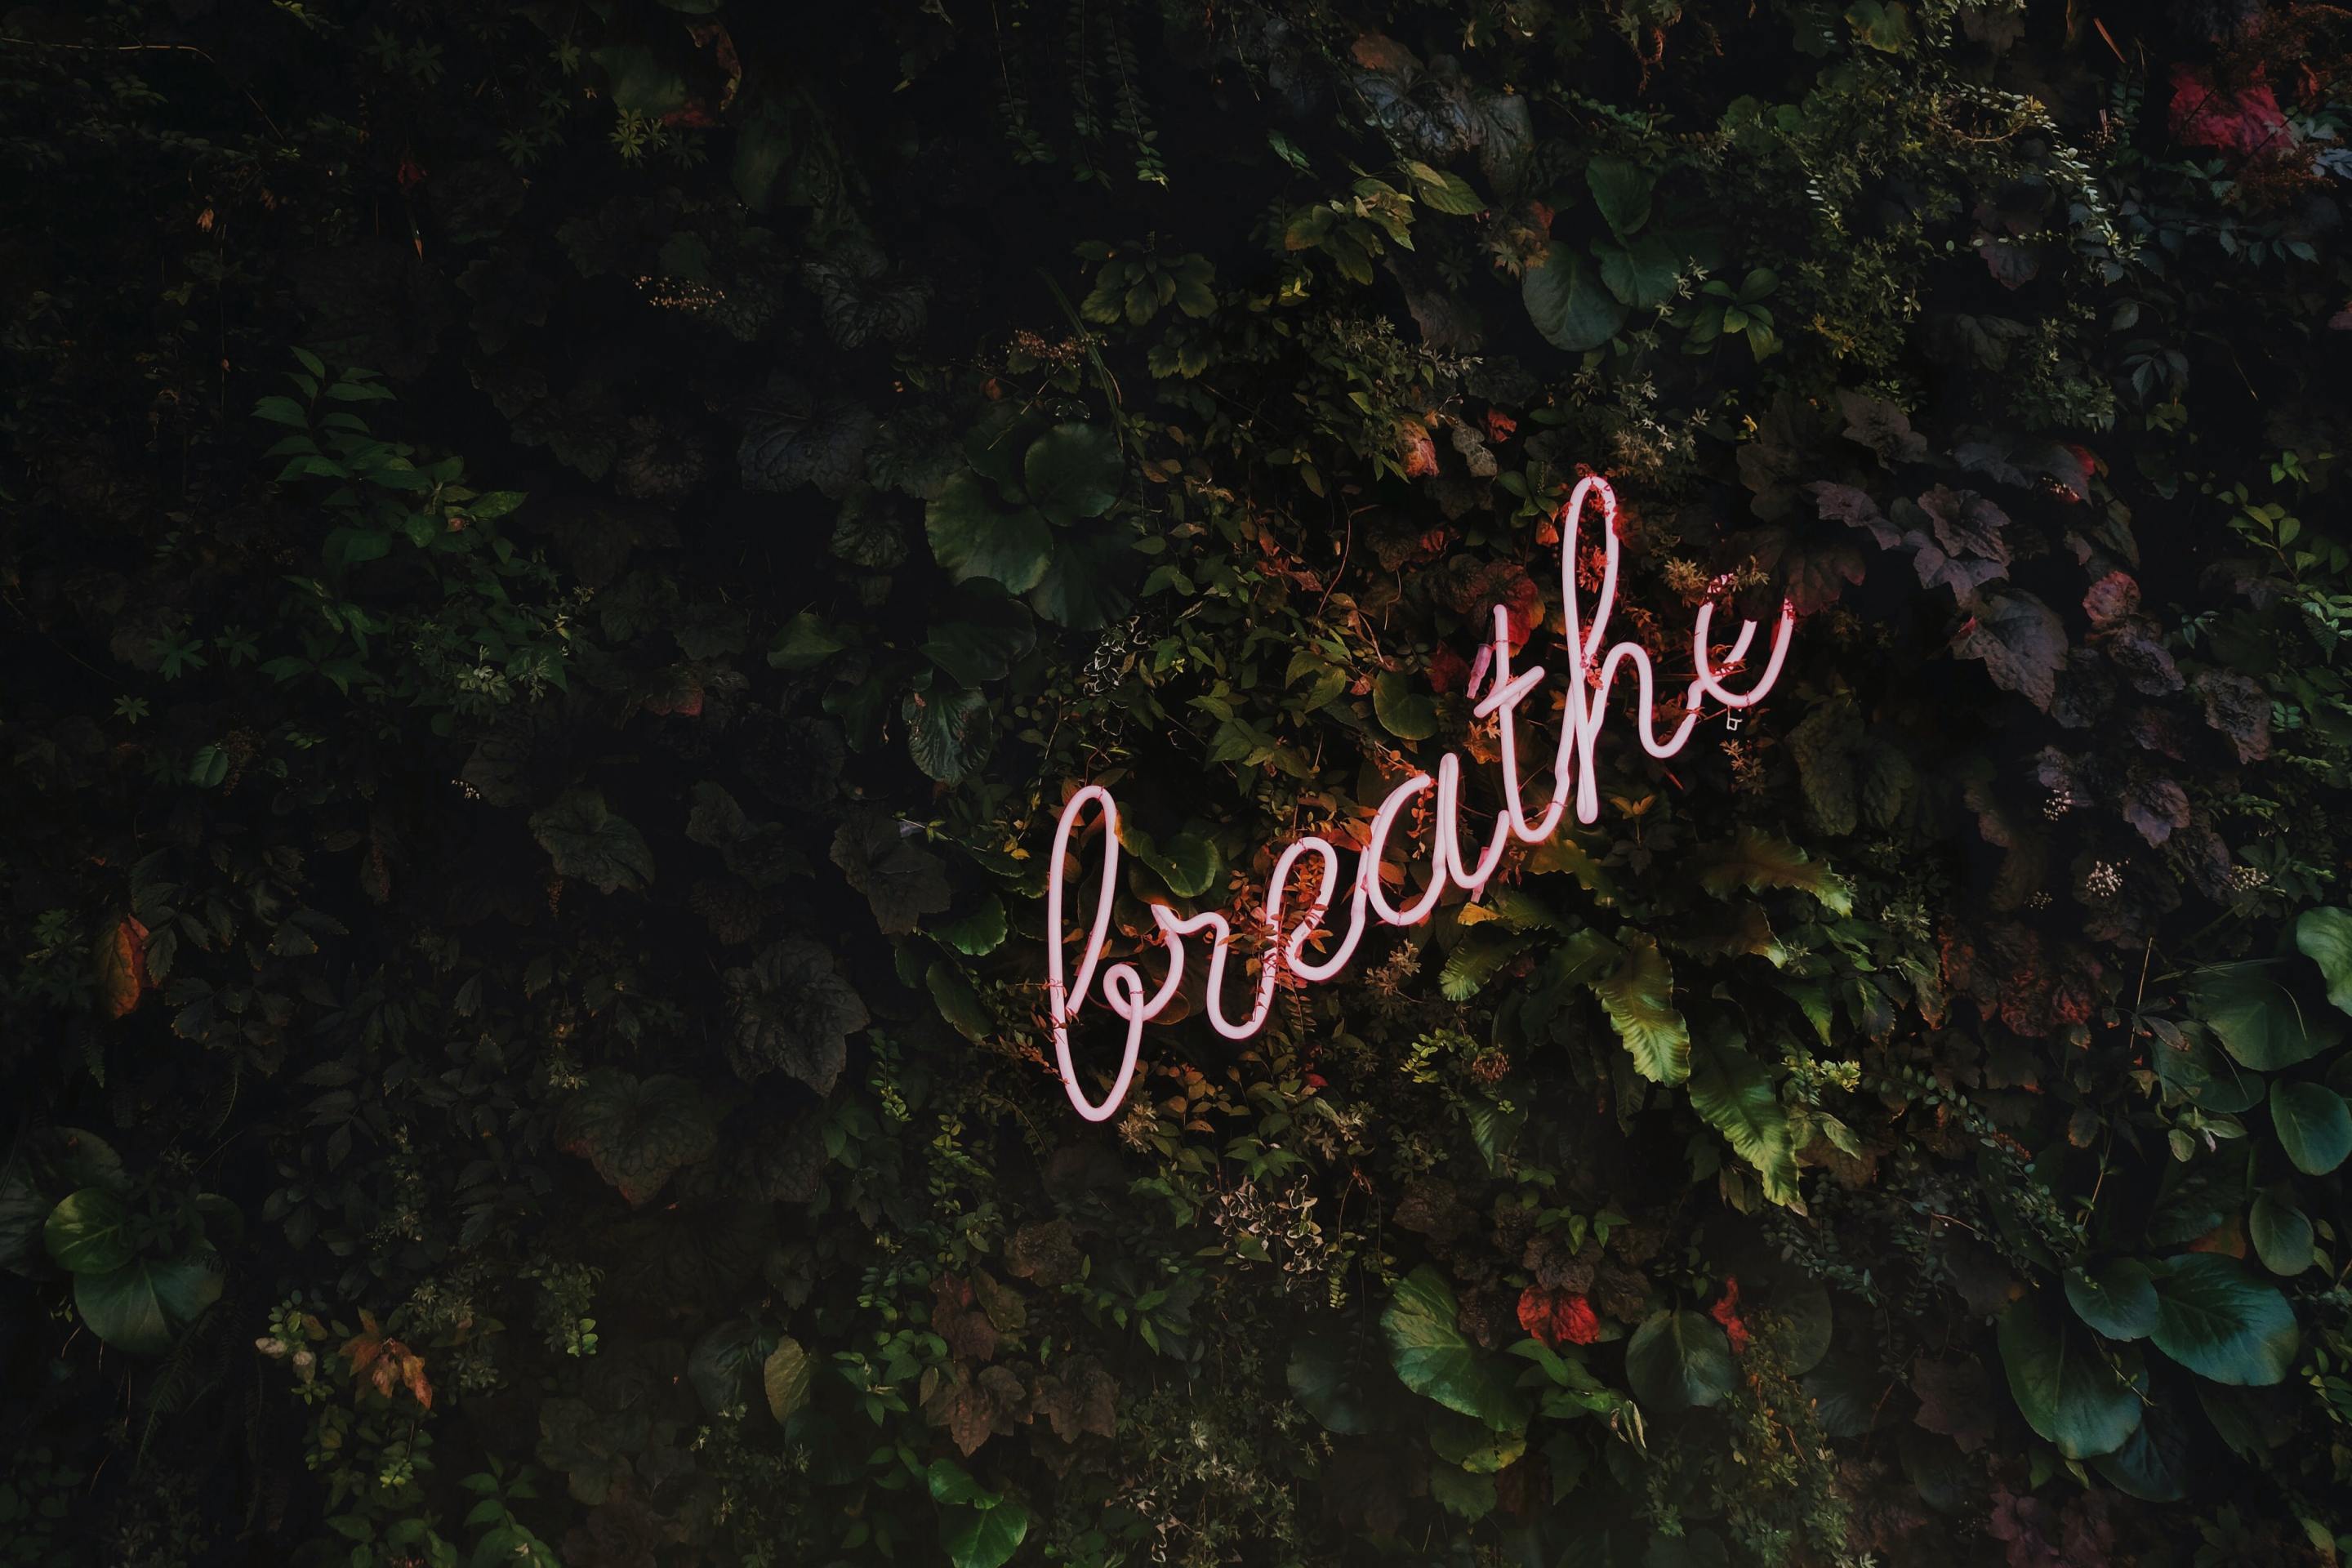 A neon sign reading "breathe" is displayed in front of a leafy background